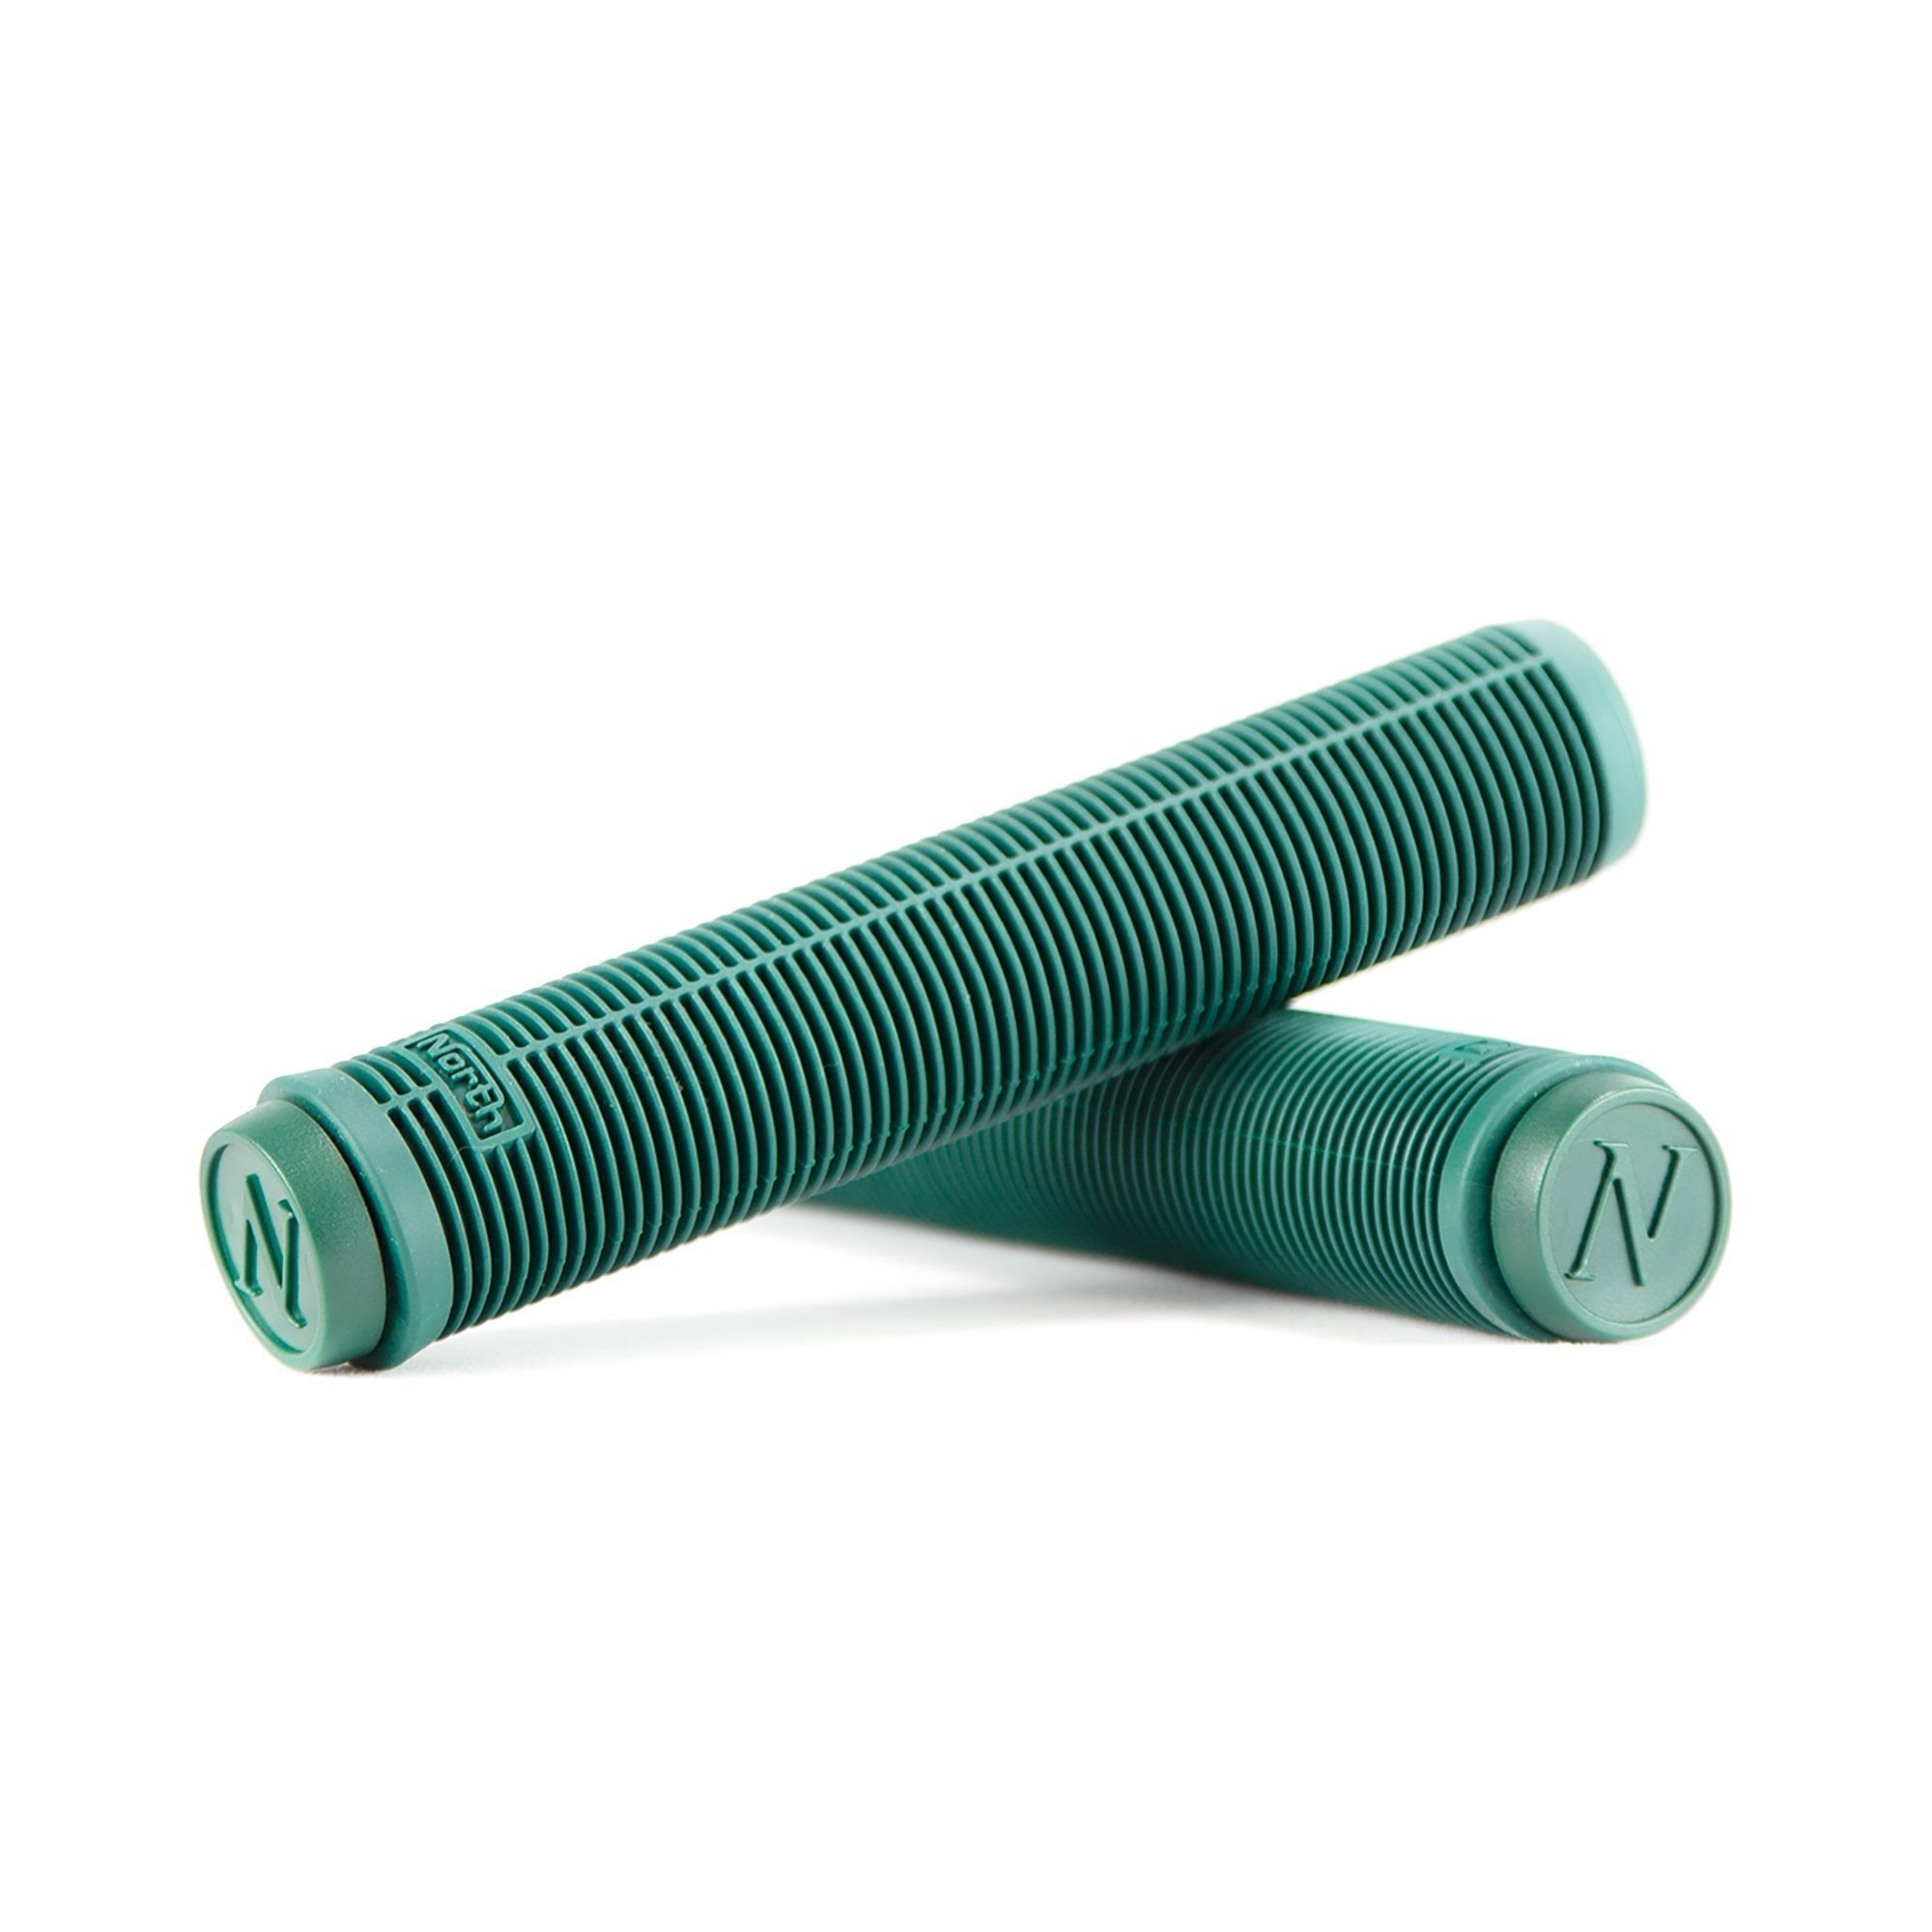 NORTH ESSENTIAL GRIPS - FOREST